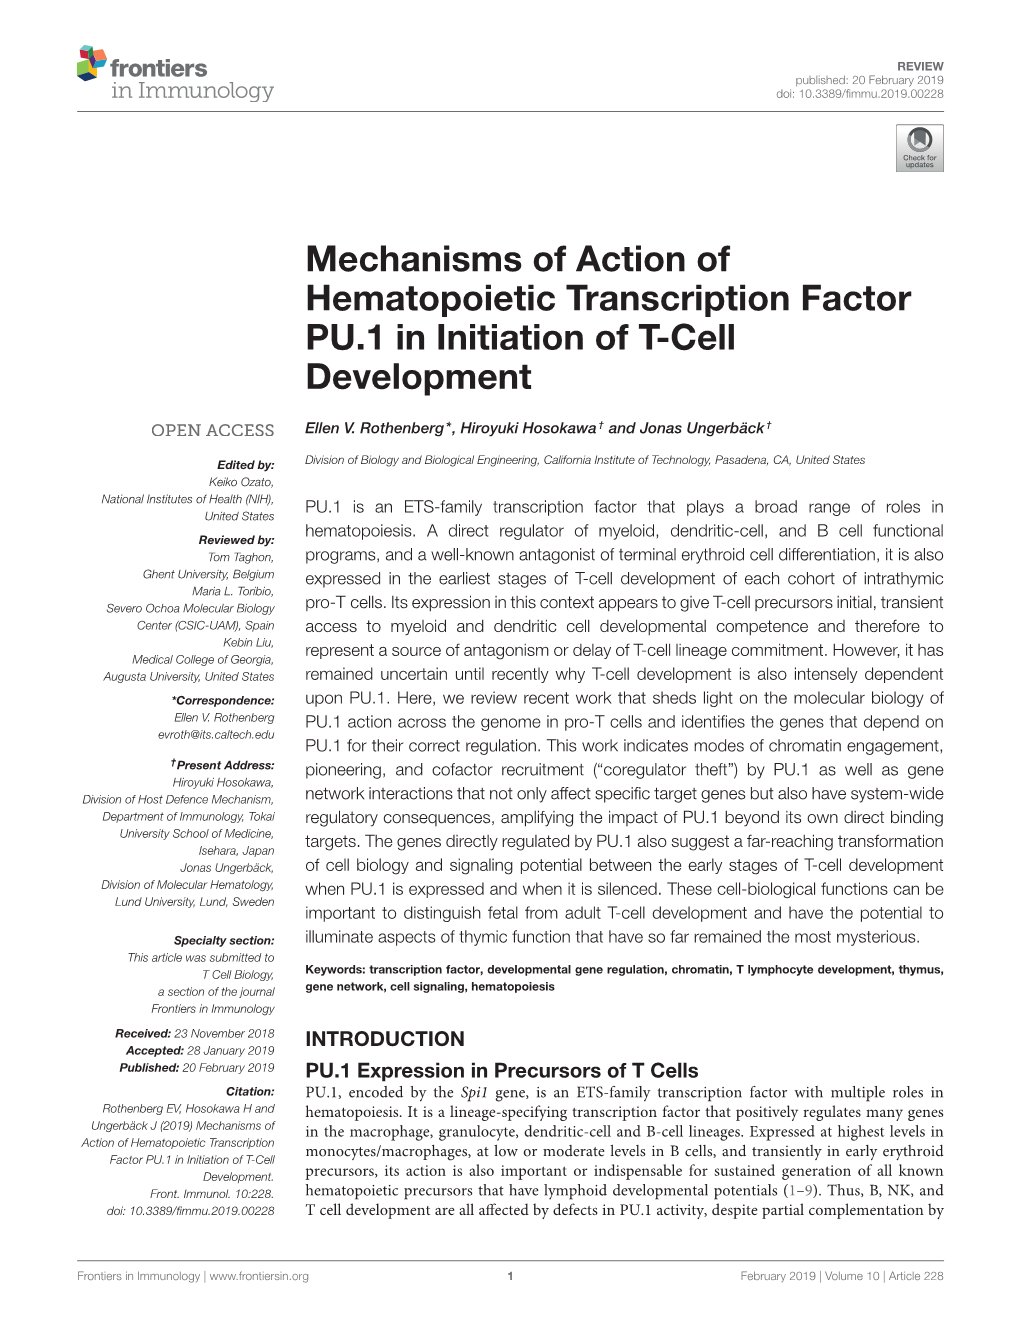 Mechanisms of Action of Hematopoietic Transcription Factor PU.1 in Initiation of T-Cell Development